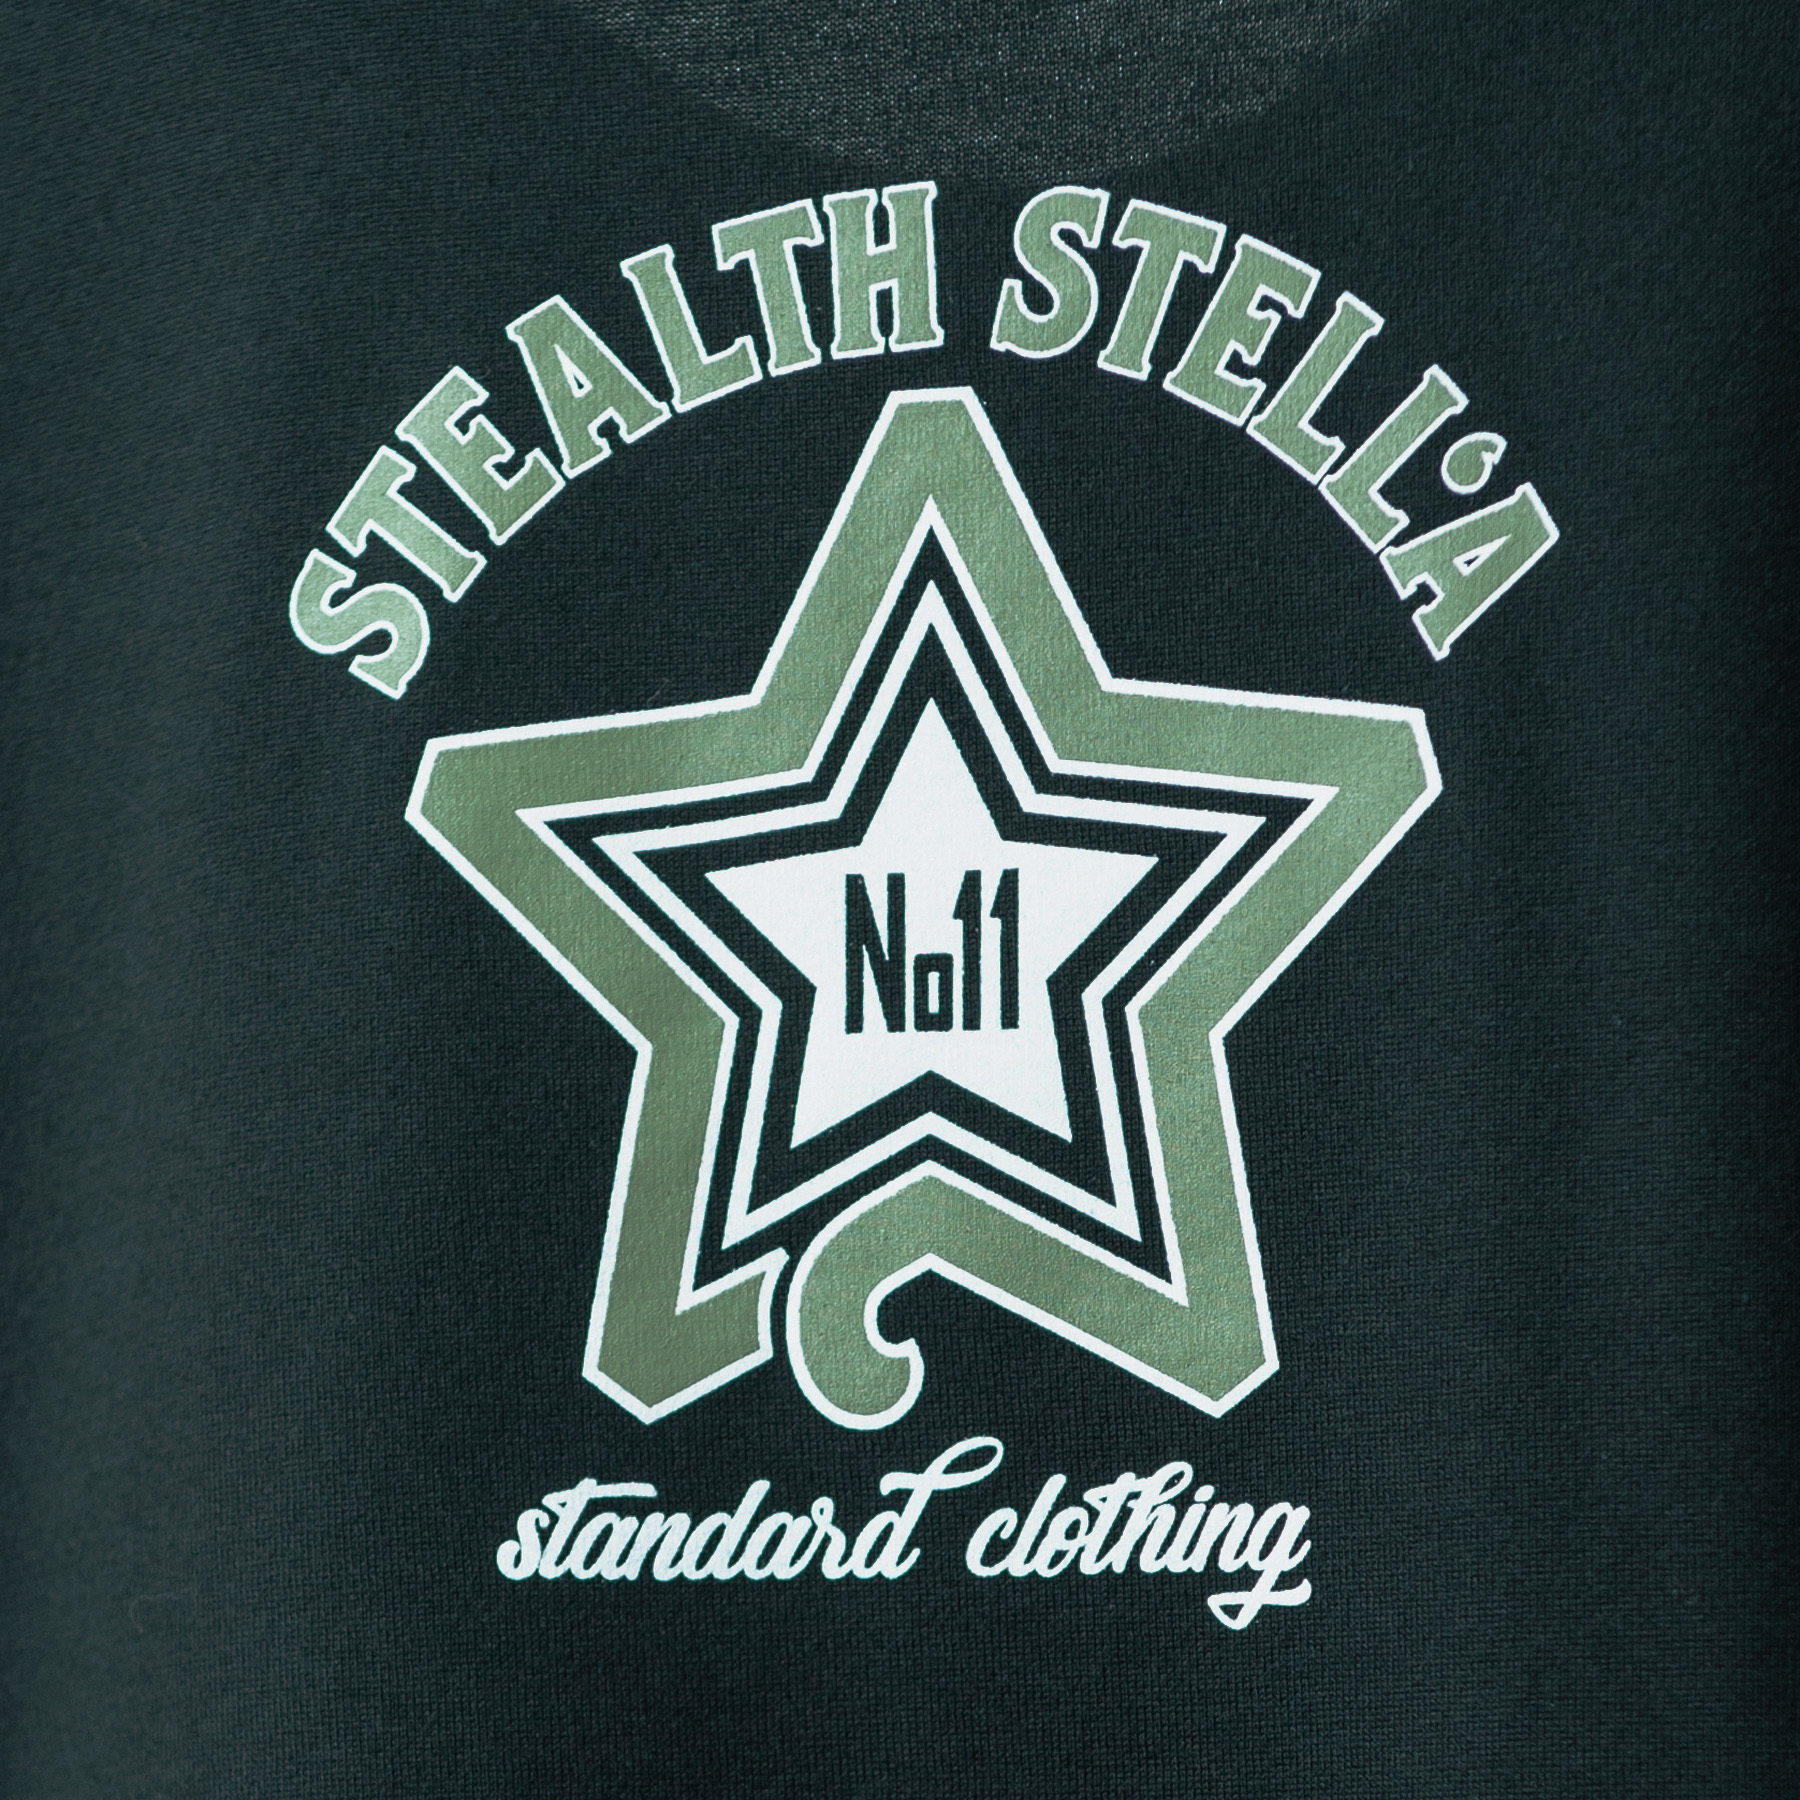 【STEALTH STELL'A】COUNTRY（BLACK）